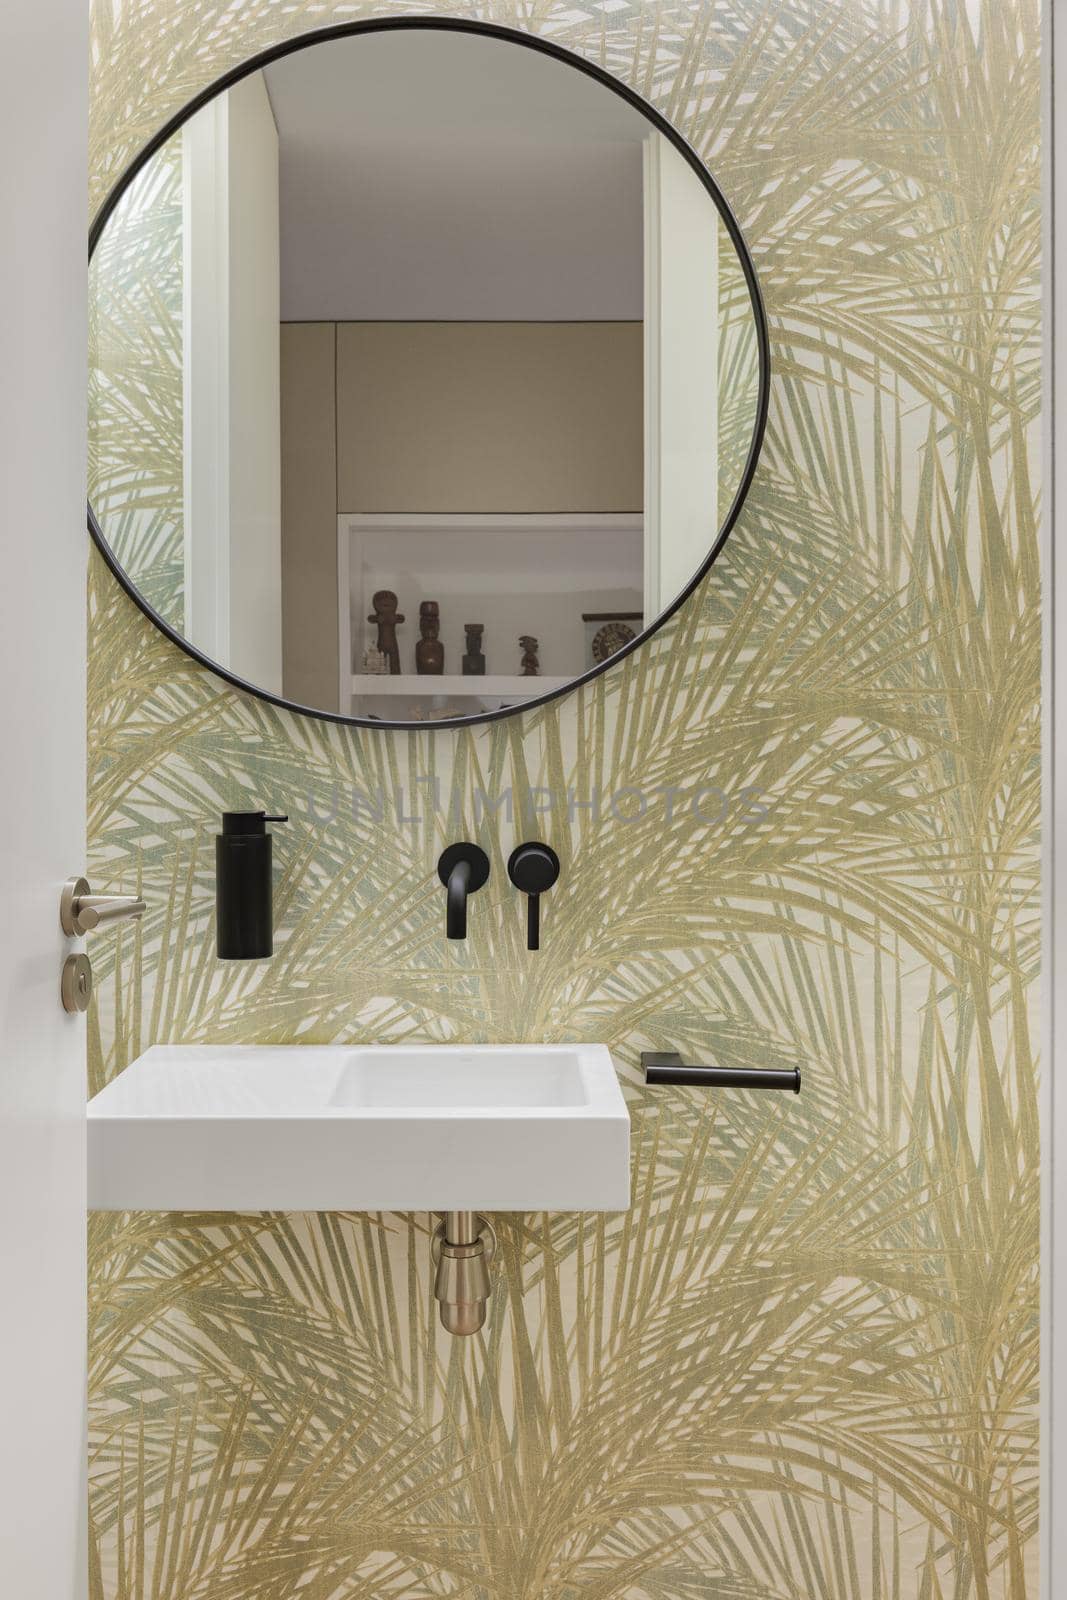 Bathroom with wallpaper with plant leaves texture, small wash basin and round mirror. Minimalist interior